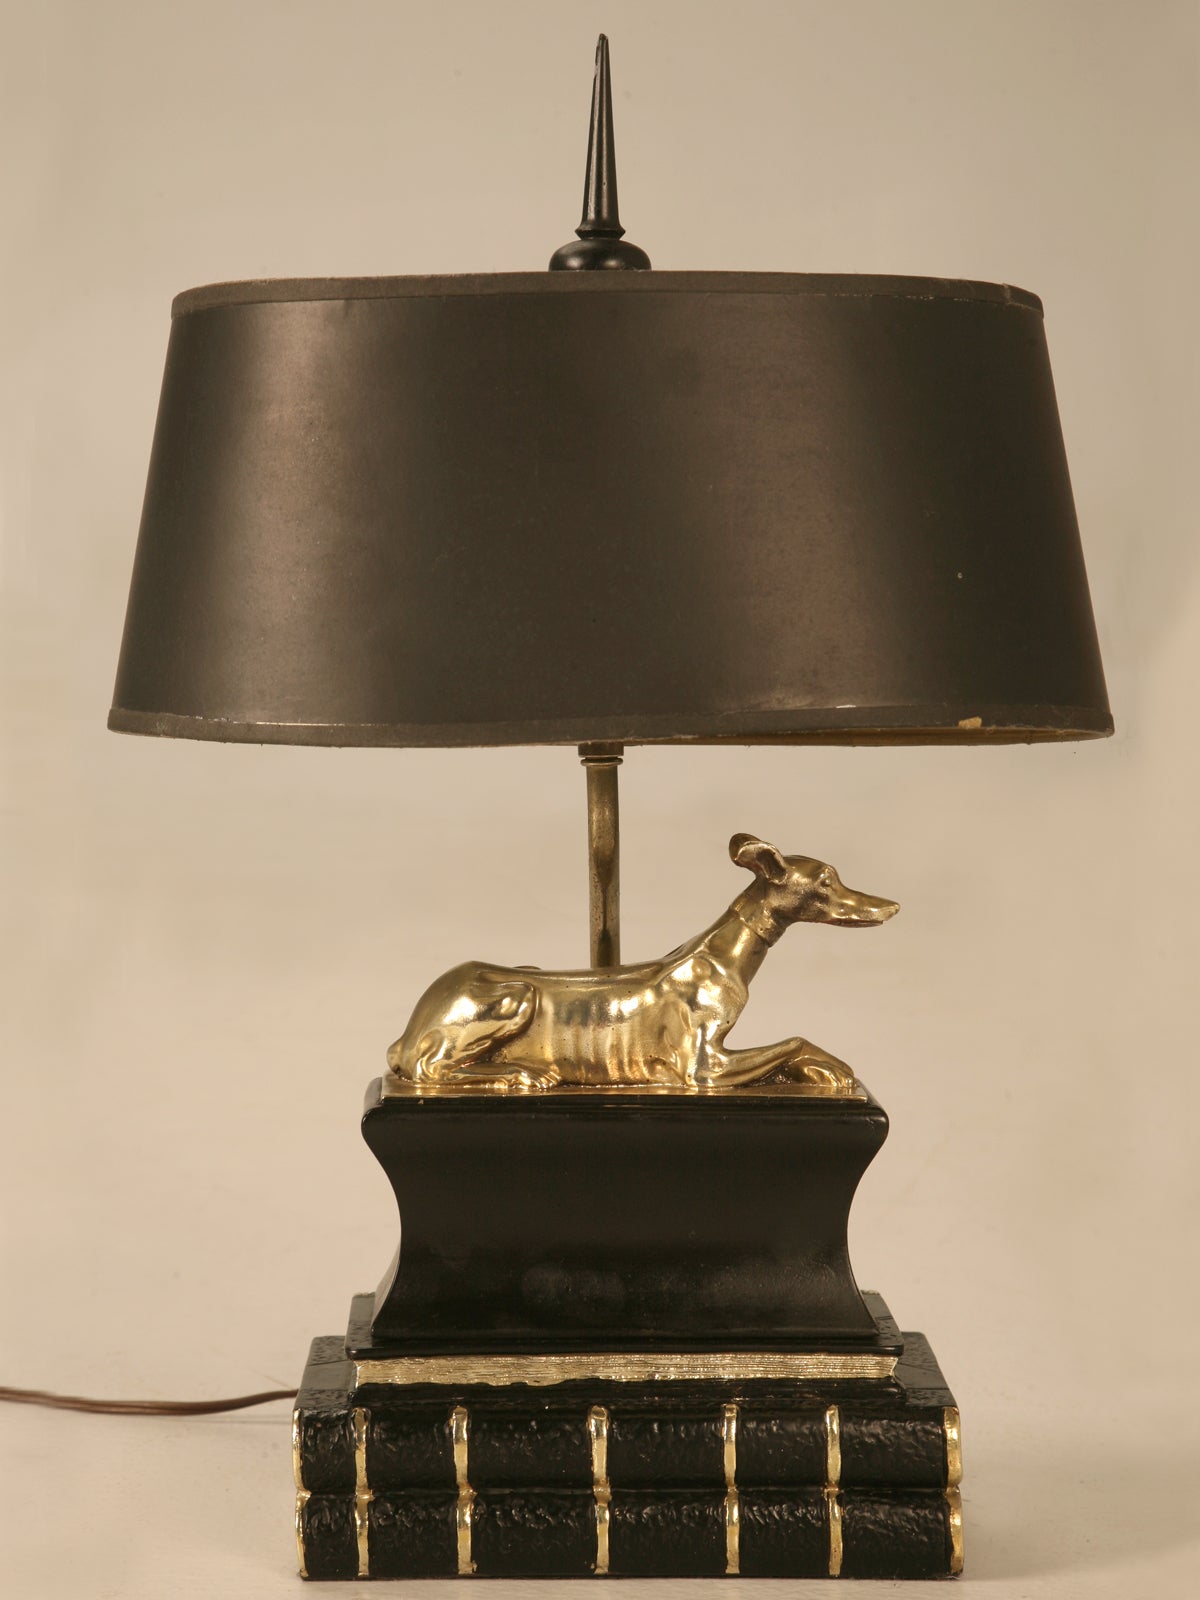 Stately Vintage Chapman Desk or Table Lamp w/Statuesque Solid Brass Whippet Dog